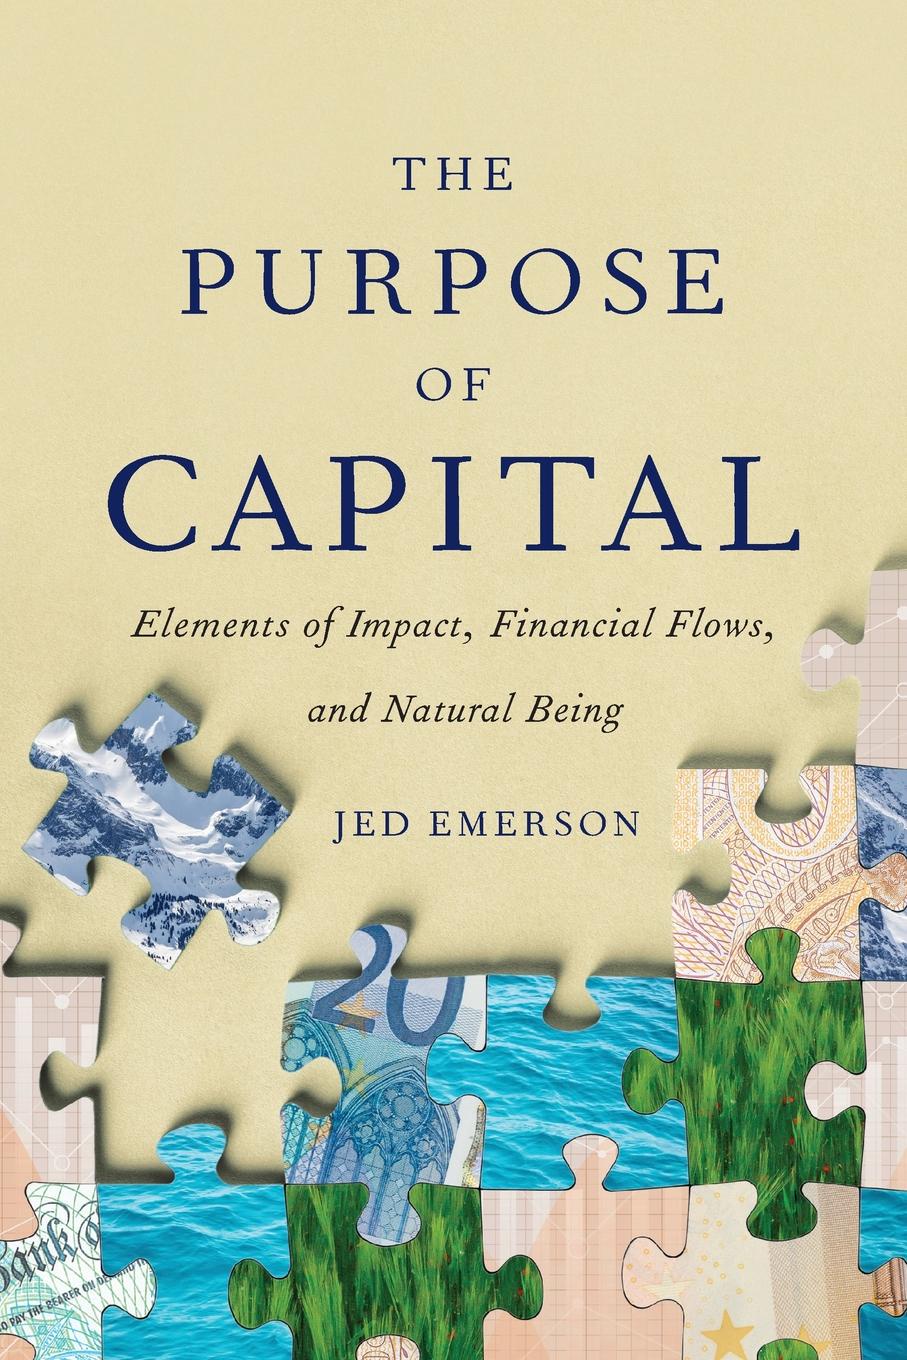 The Purpose of Capital. Elements of Impact, Financial Flows, and Natural Being